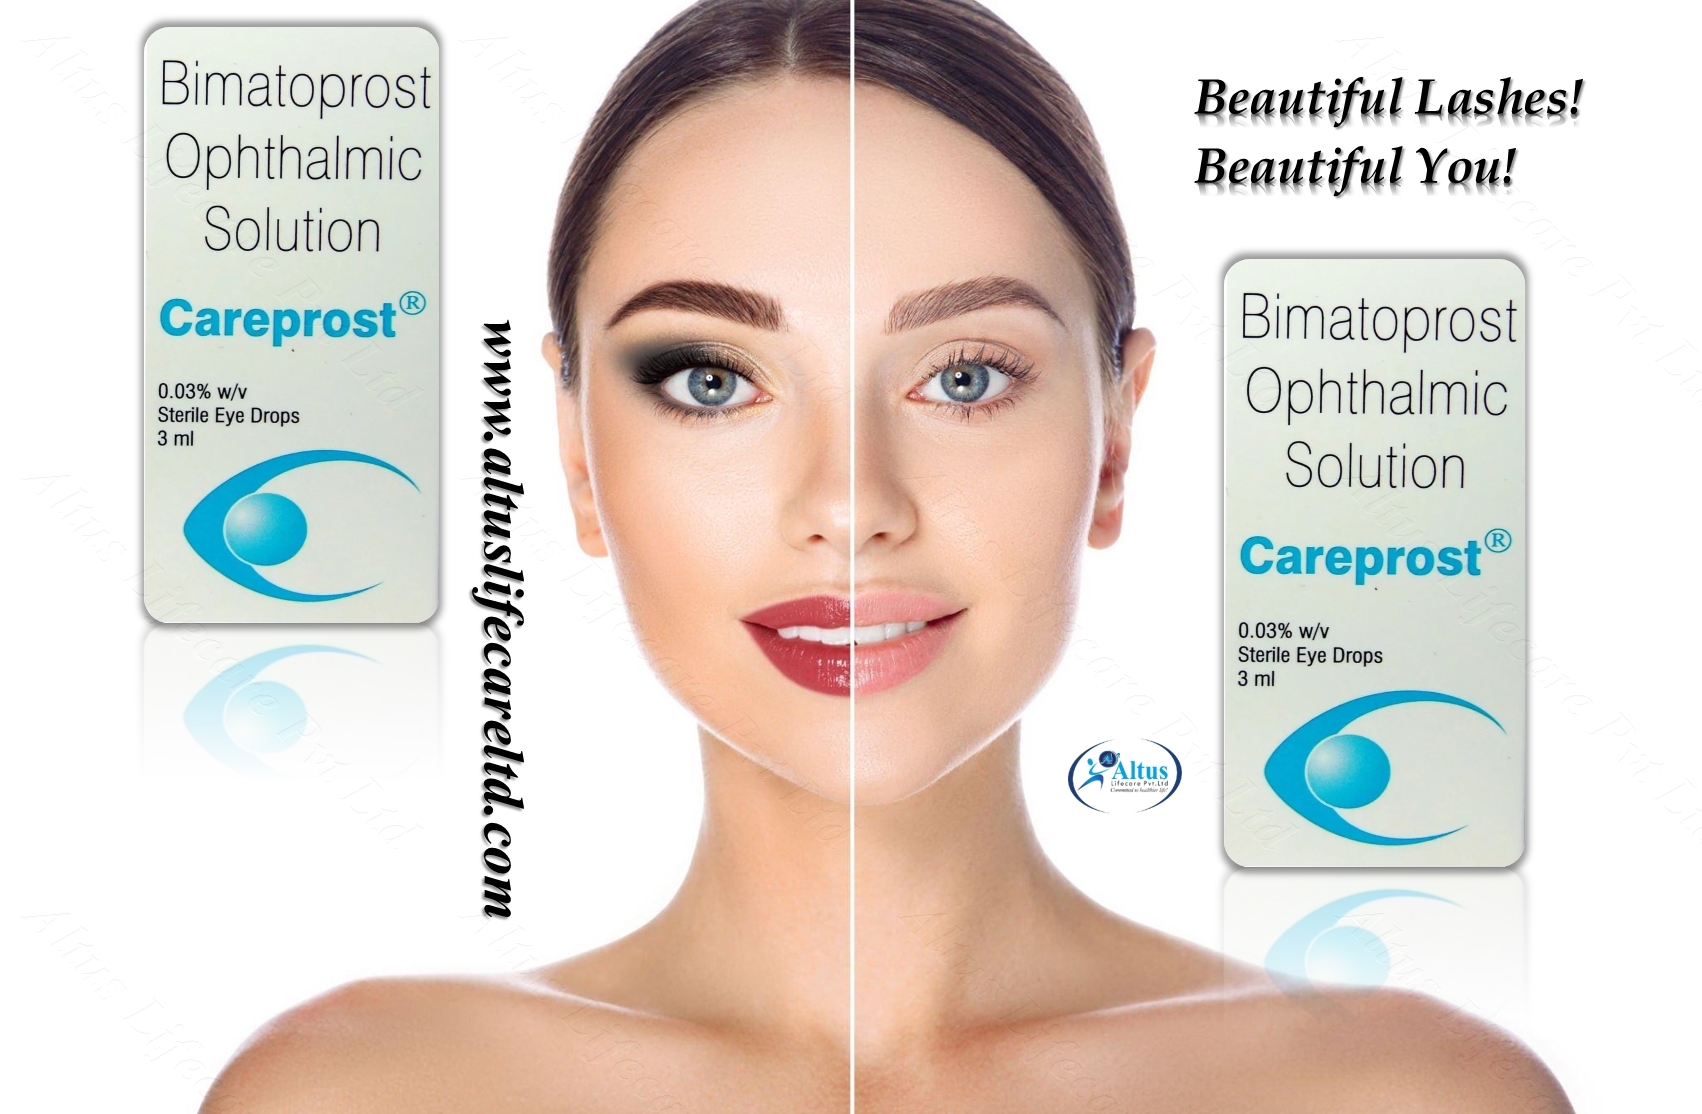 Buy Careprost 3ml | Eye Lash Serum can give your lashes a desirable length and thickness